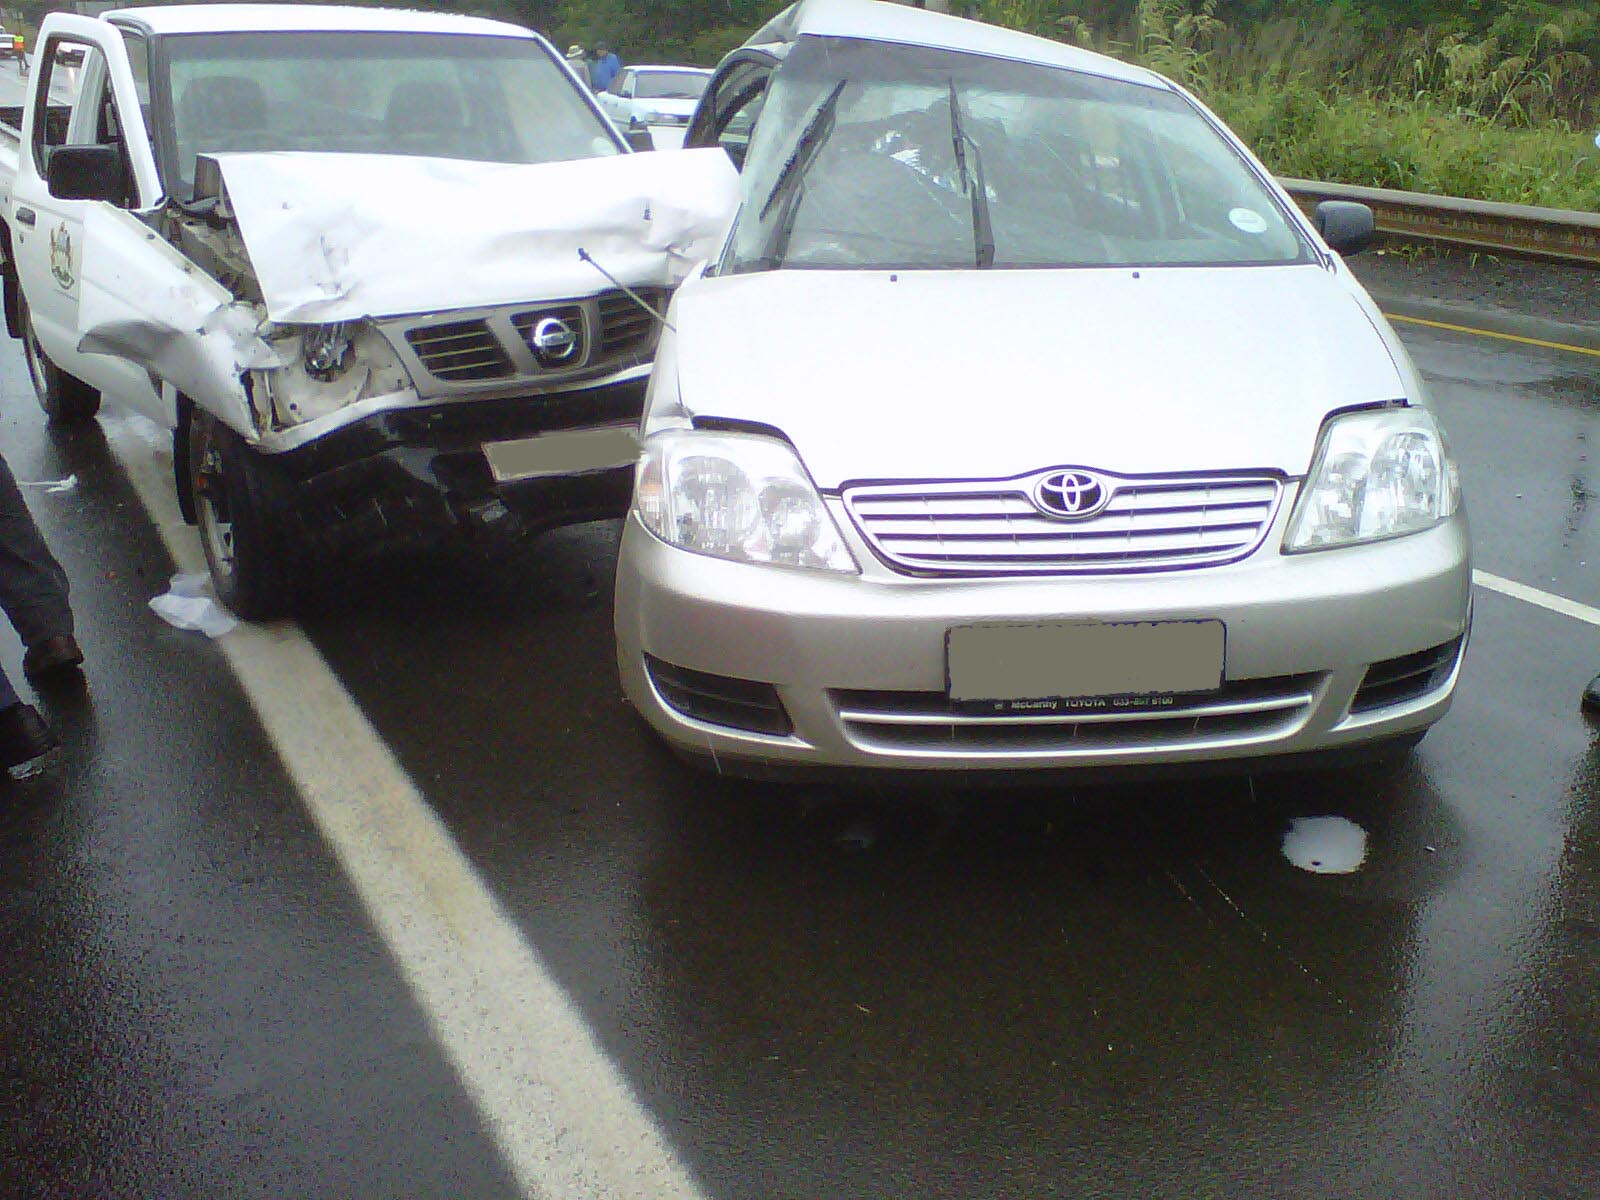 Getting great auto insurance will help you get through days like this ... photo by CC user ER24 EMS (Pty) Ltd. on Flickr 